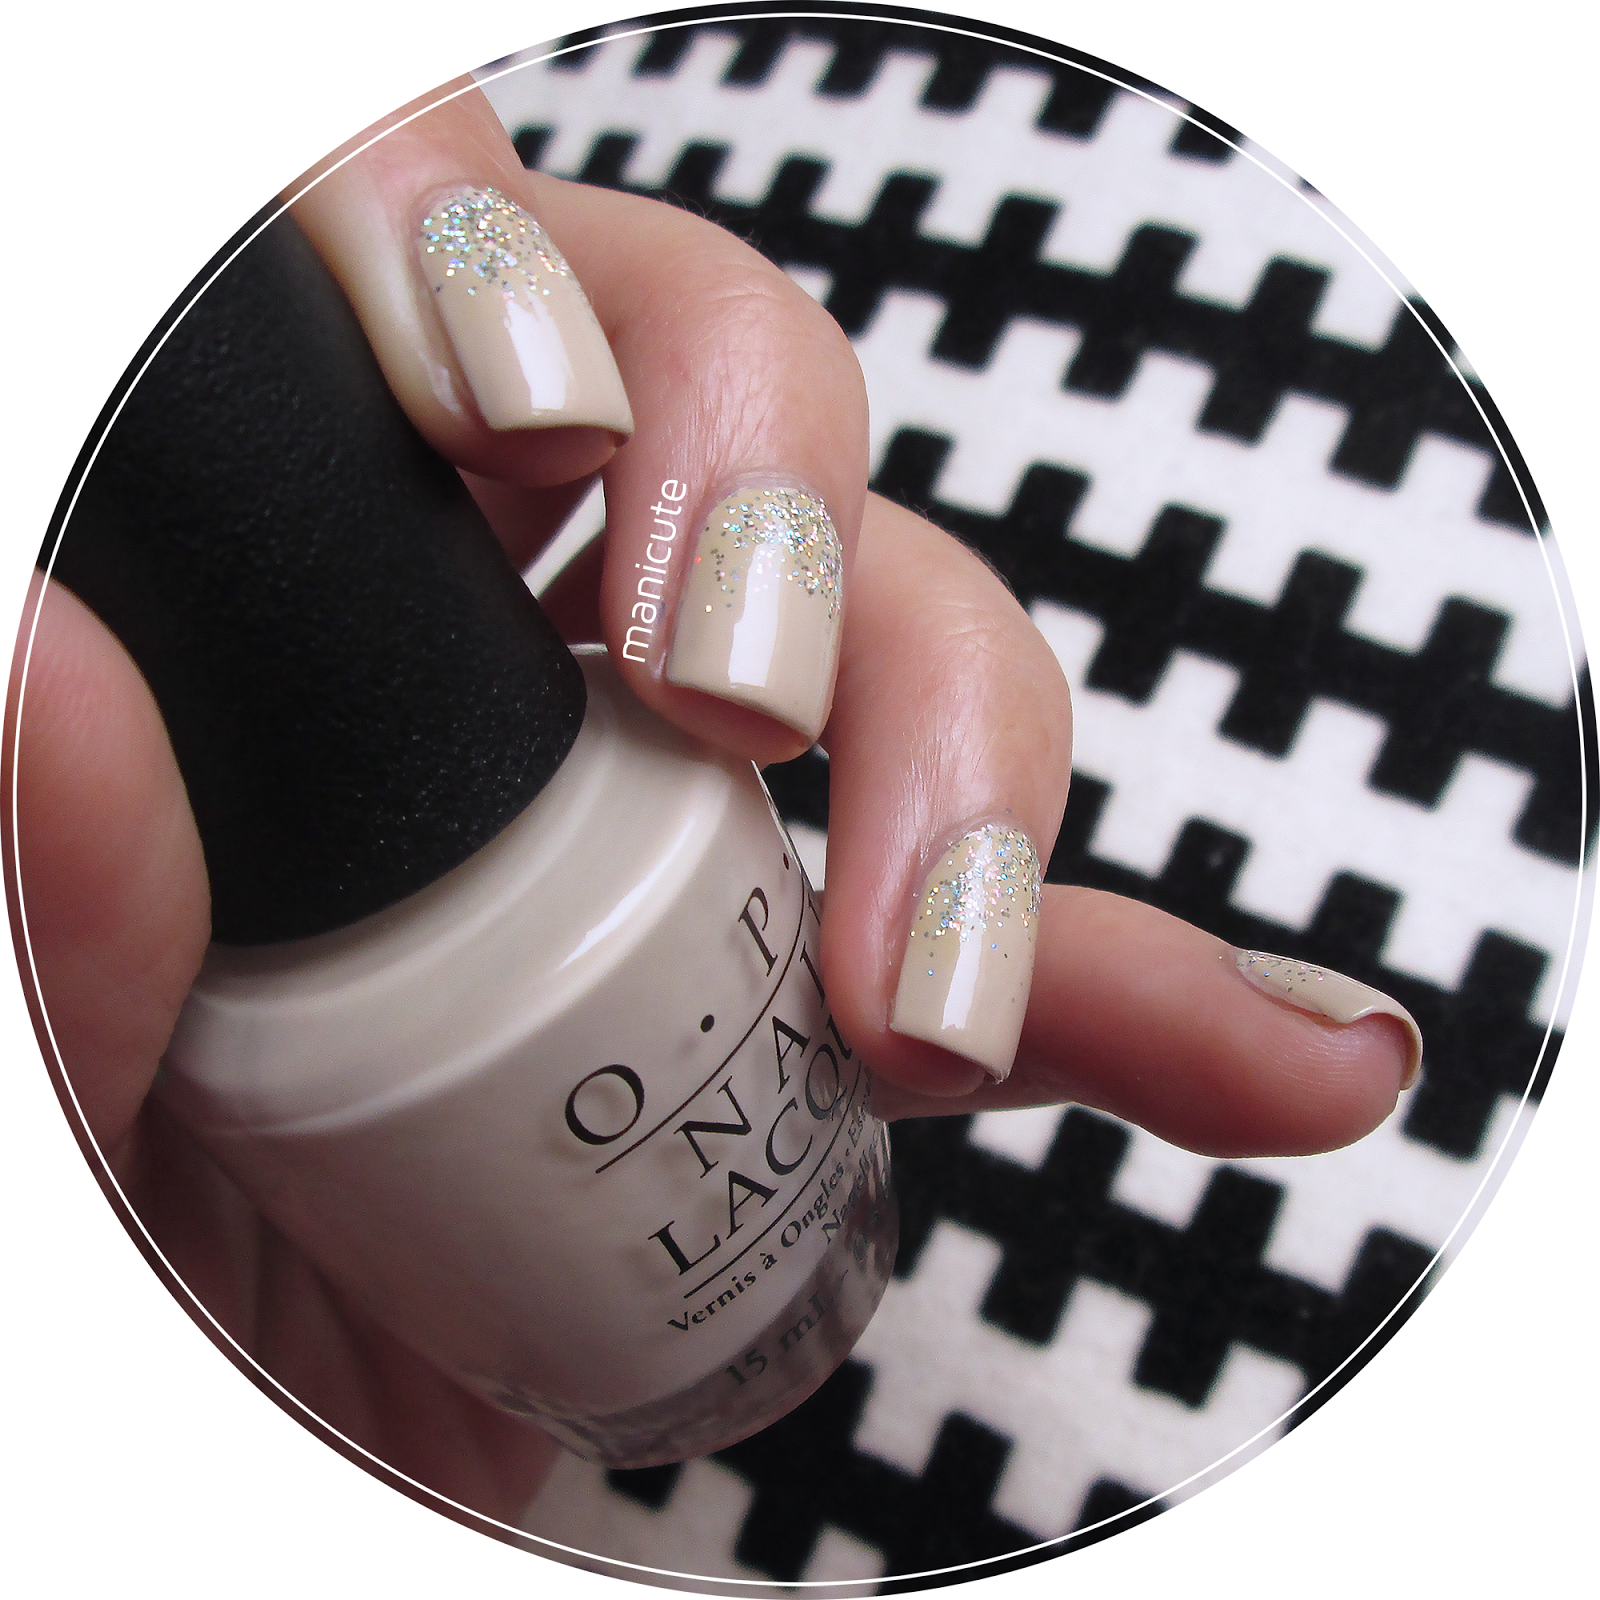 OPI you're so vain-illa swatch